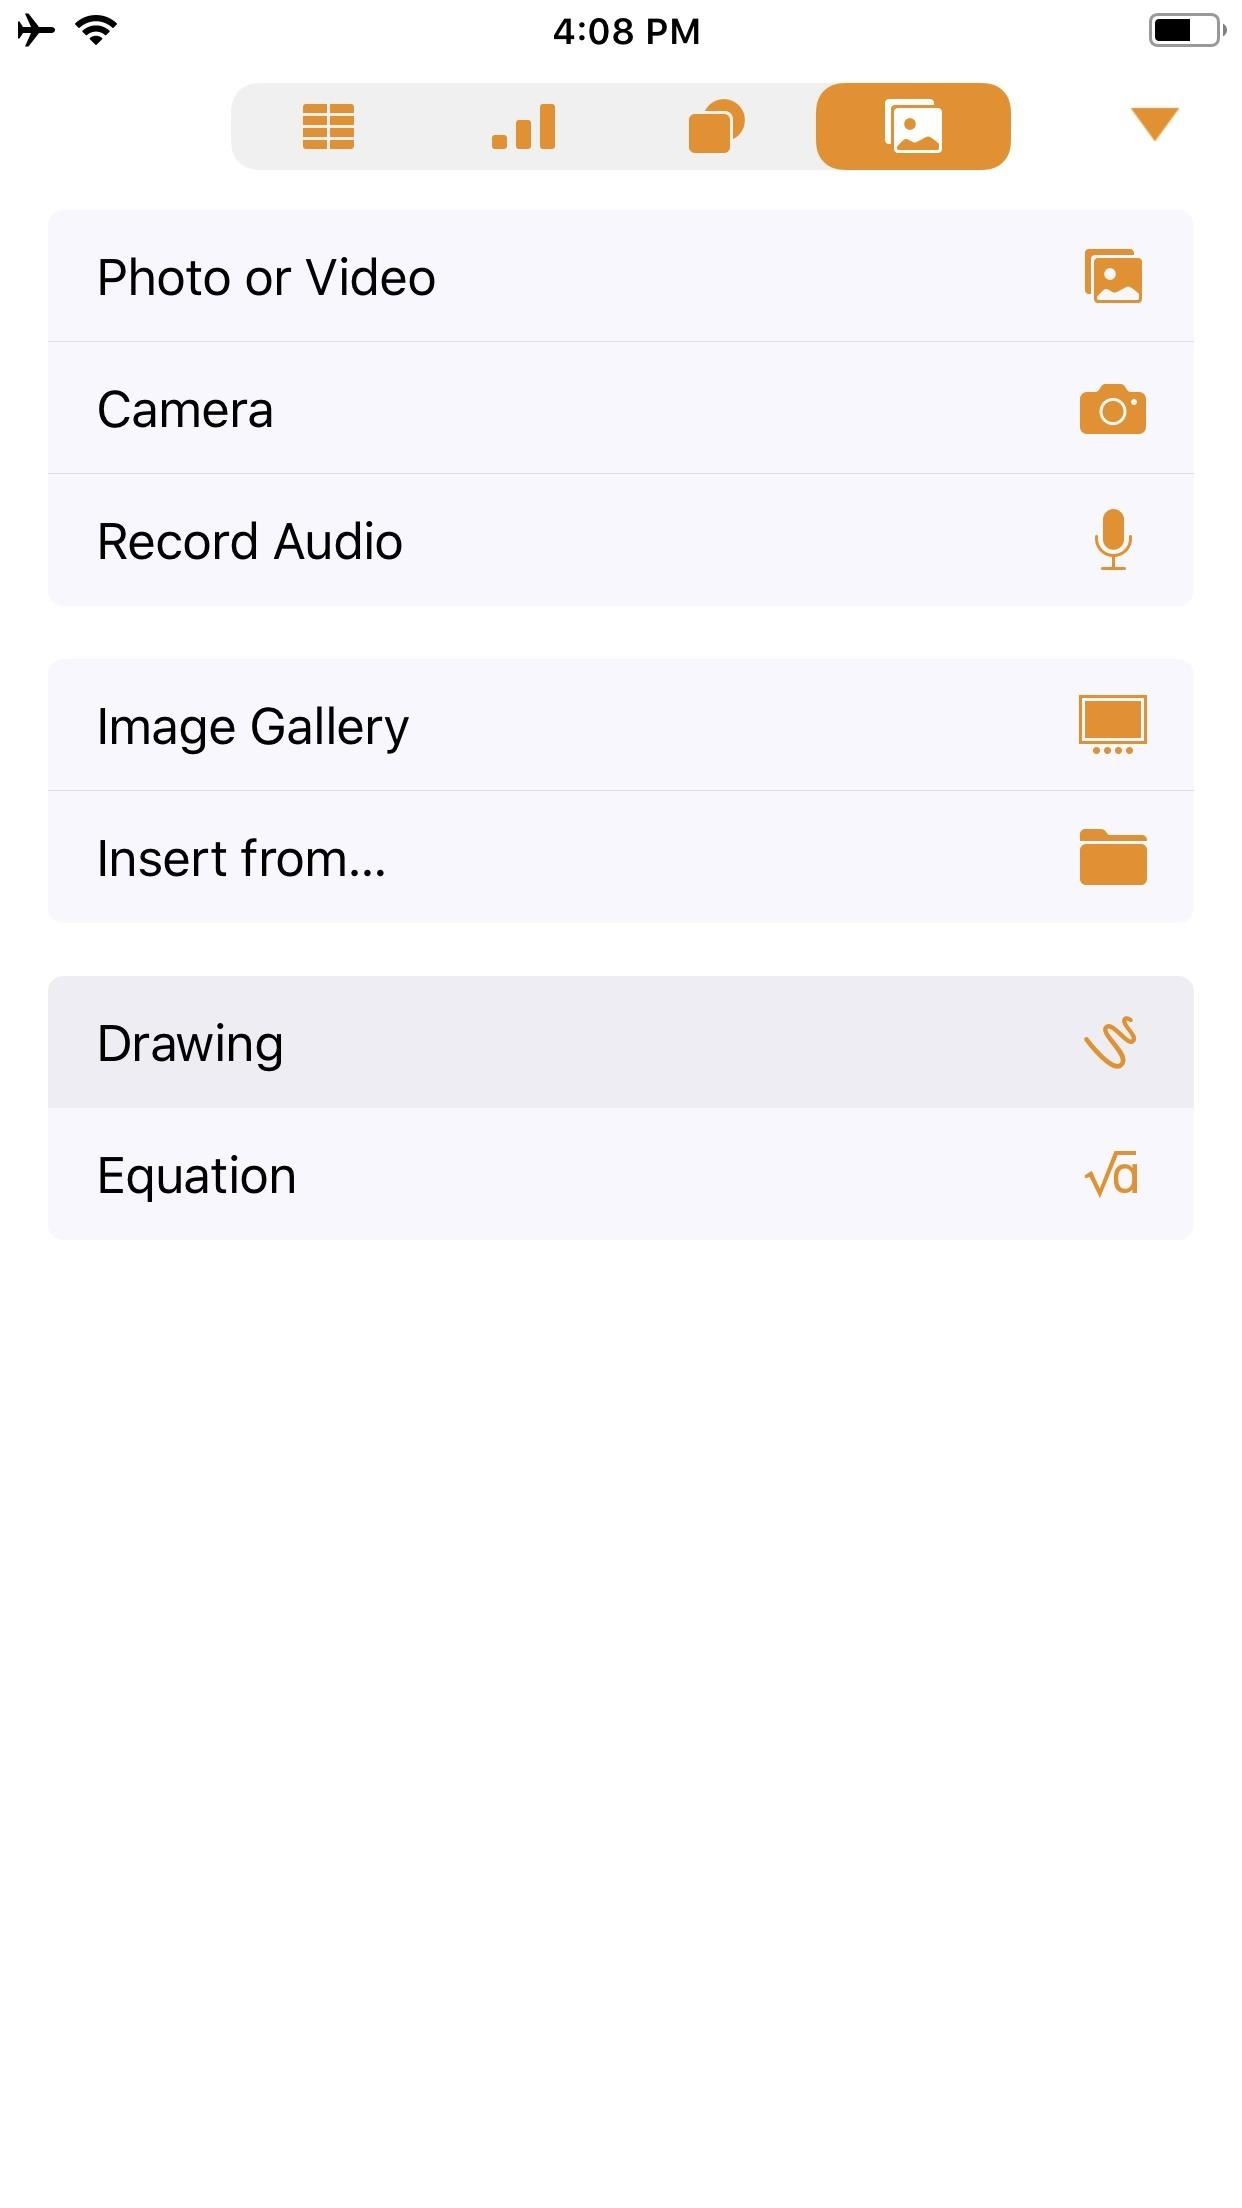 How to Animate & Share Drawings on Your iPhone Without Any Third-Party Apps